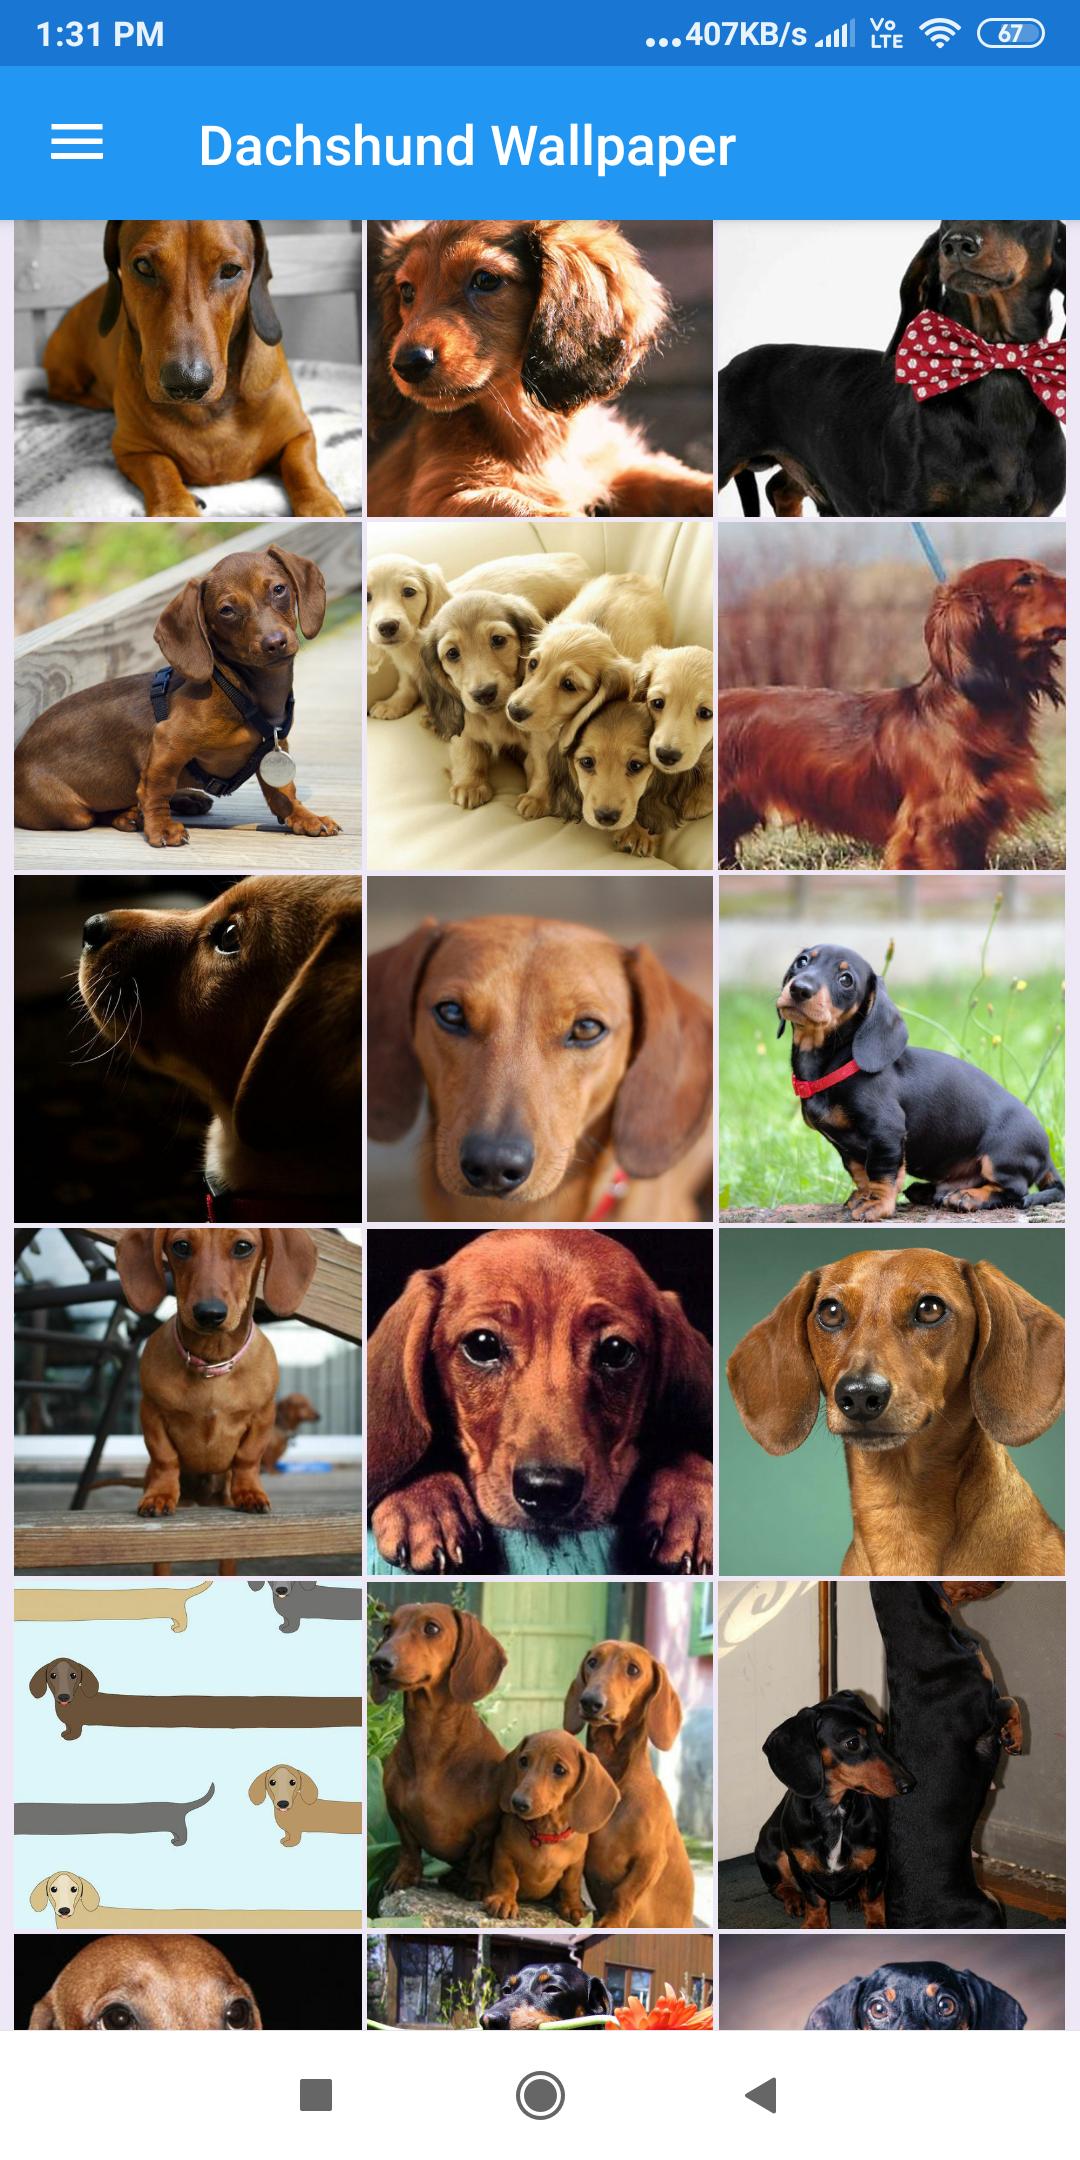 Dachshund Wallpapers: HD Images,Free Pics download 2.0.37 Screenshot 1